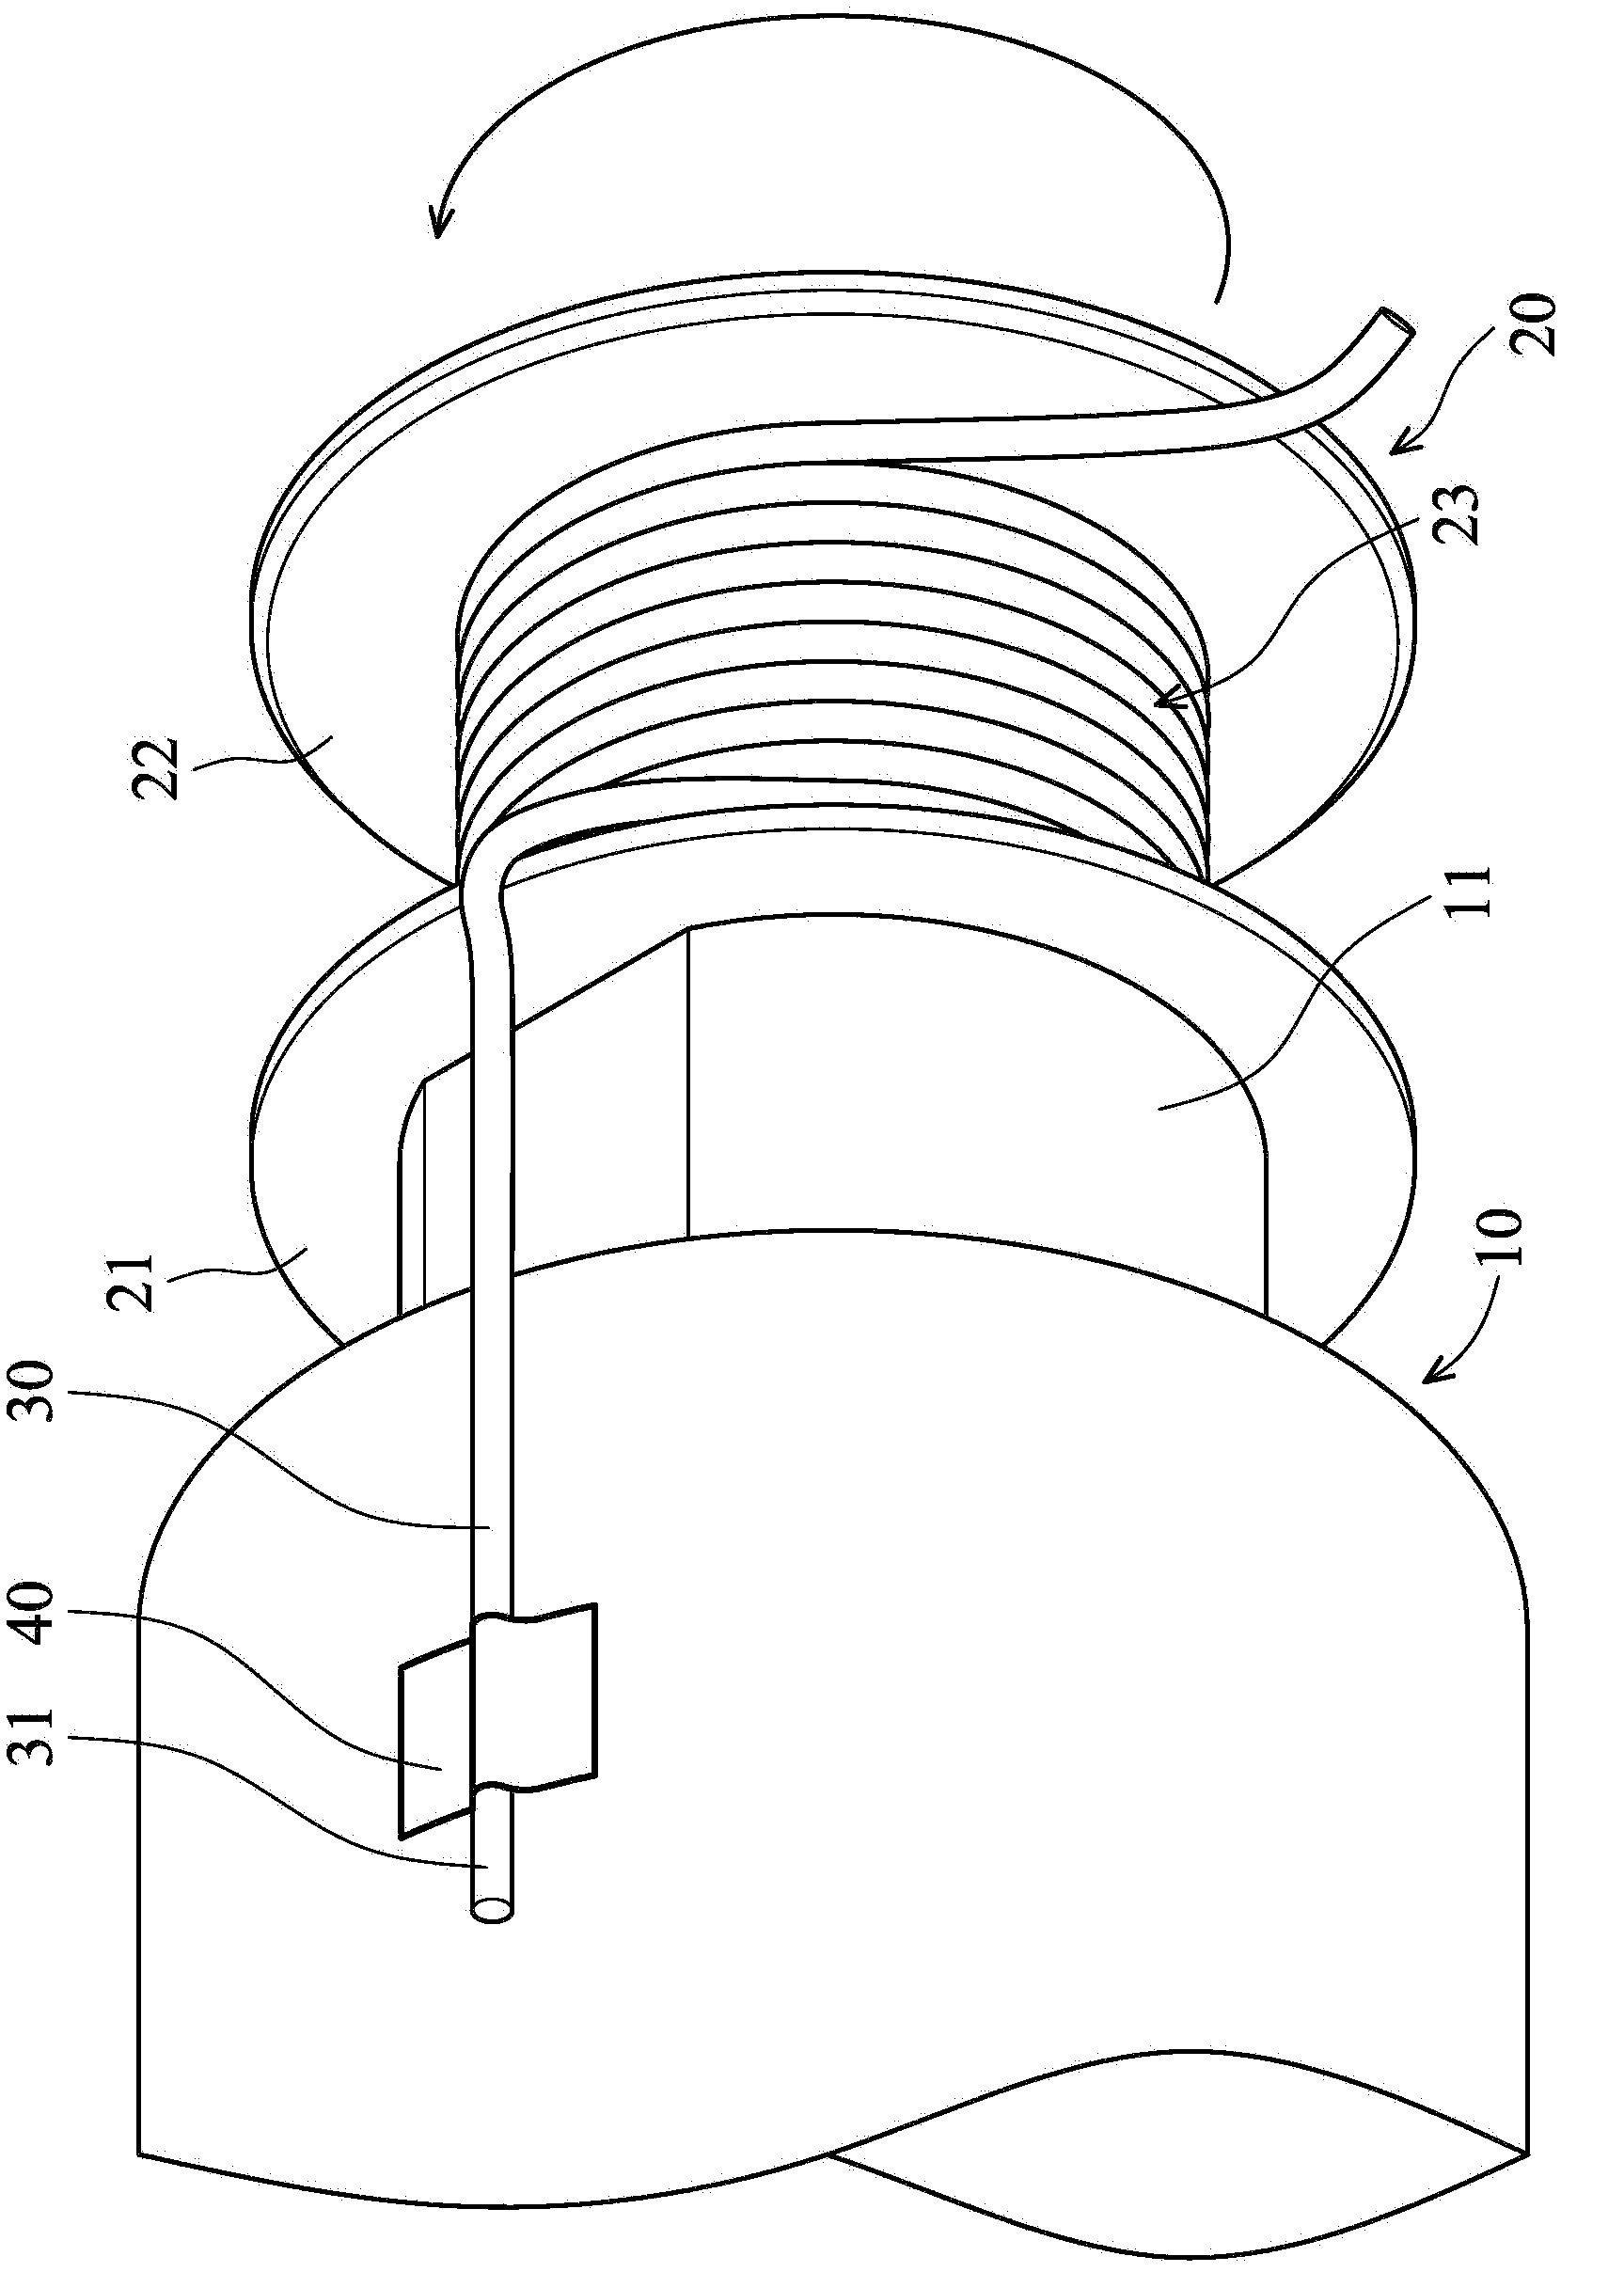 Winder and method for winding wire on winder